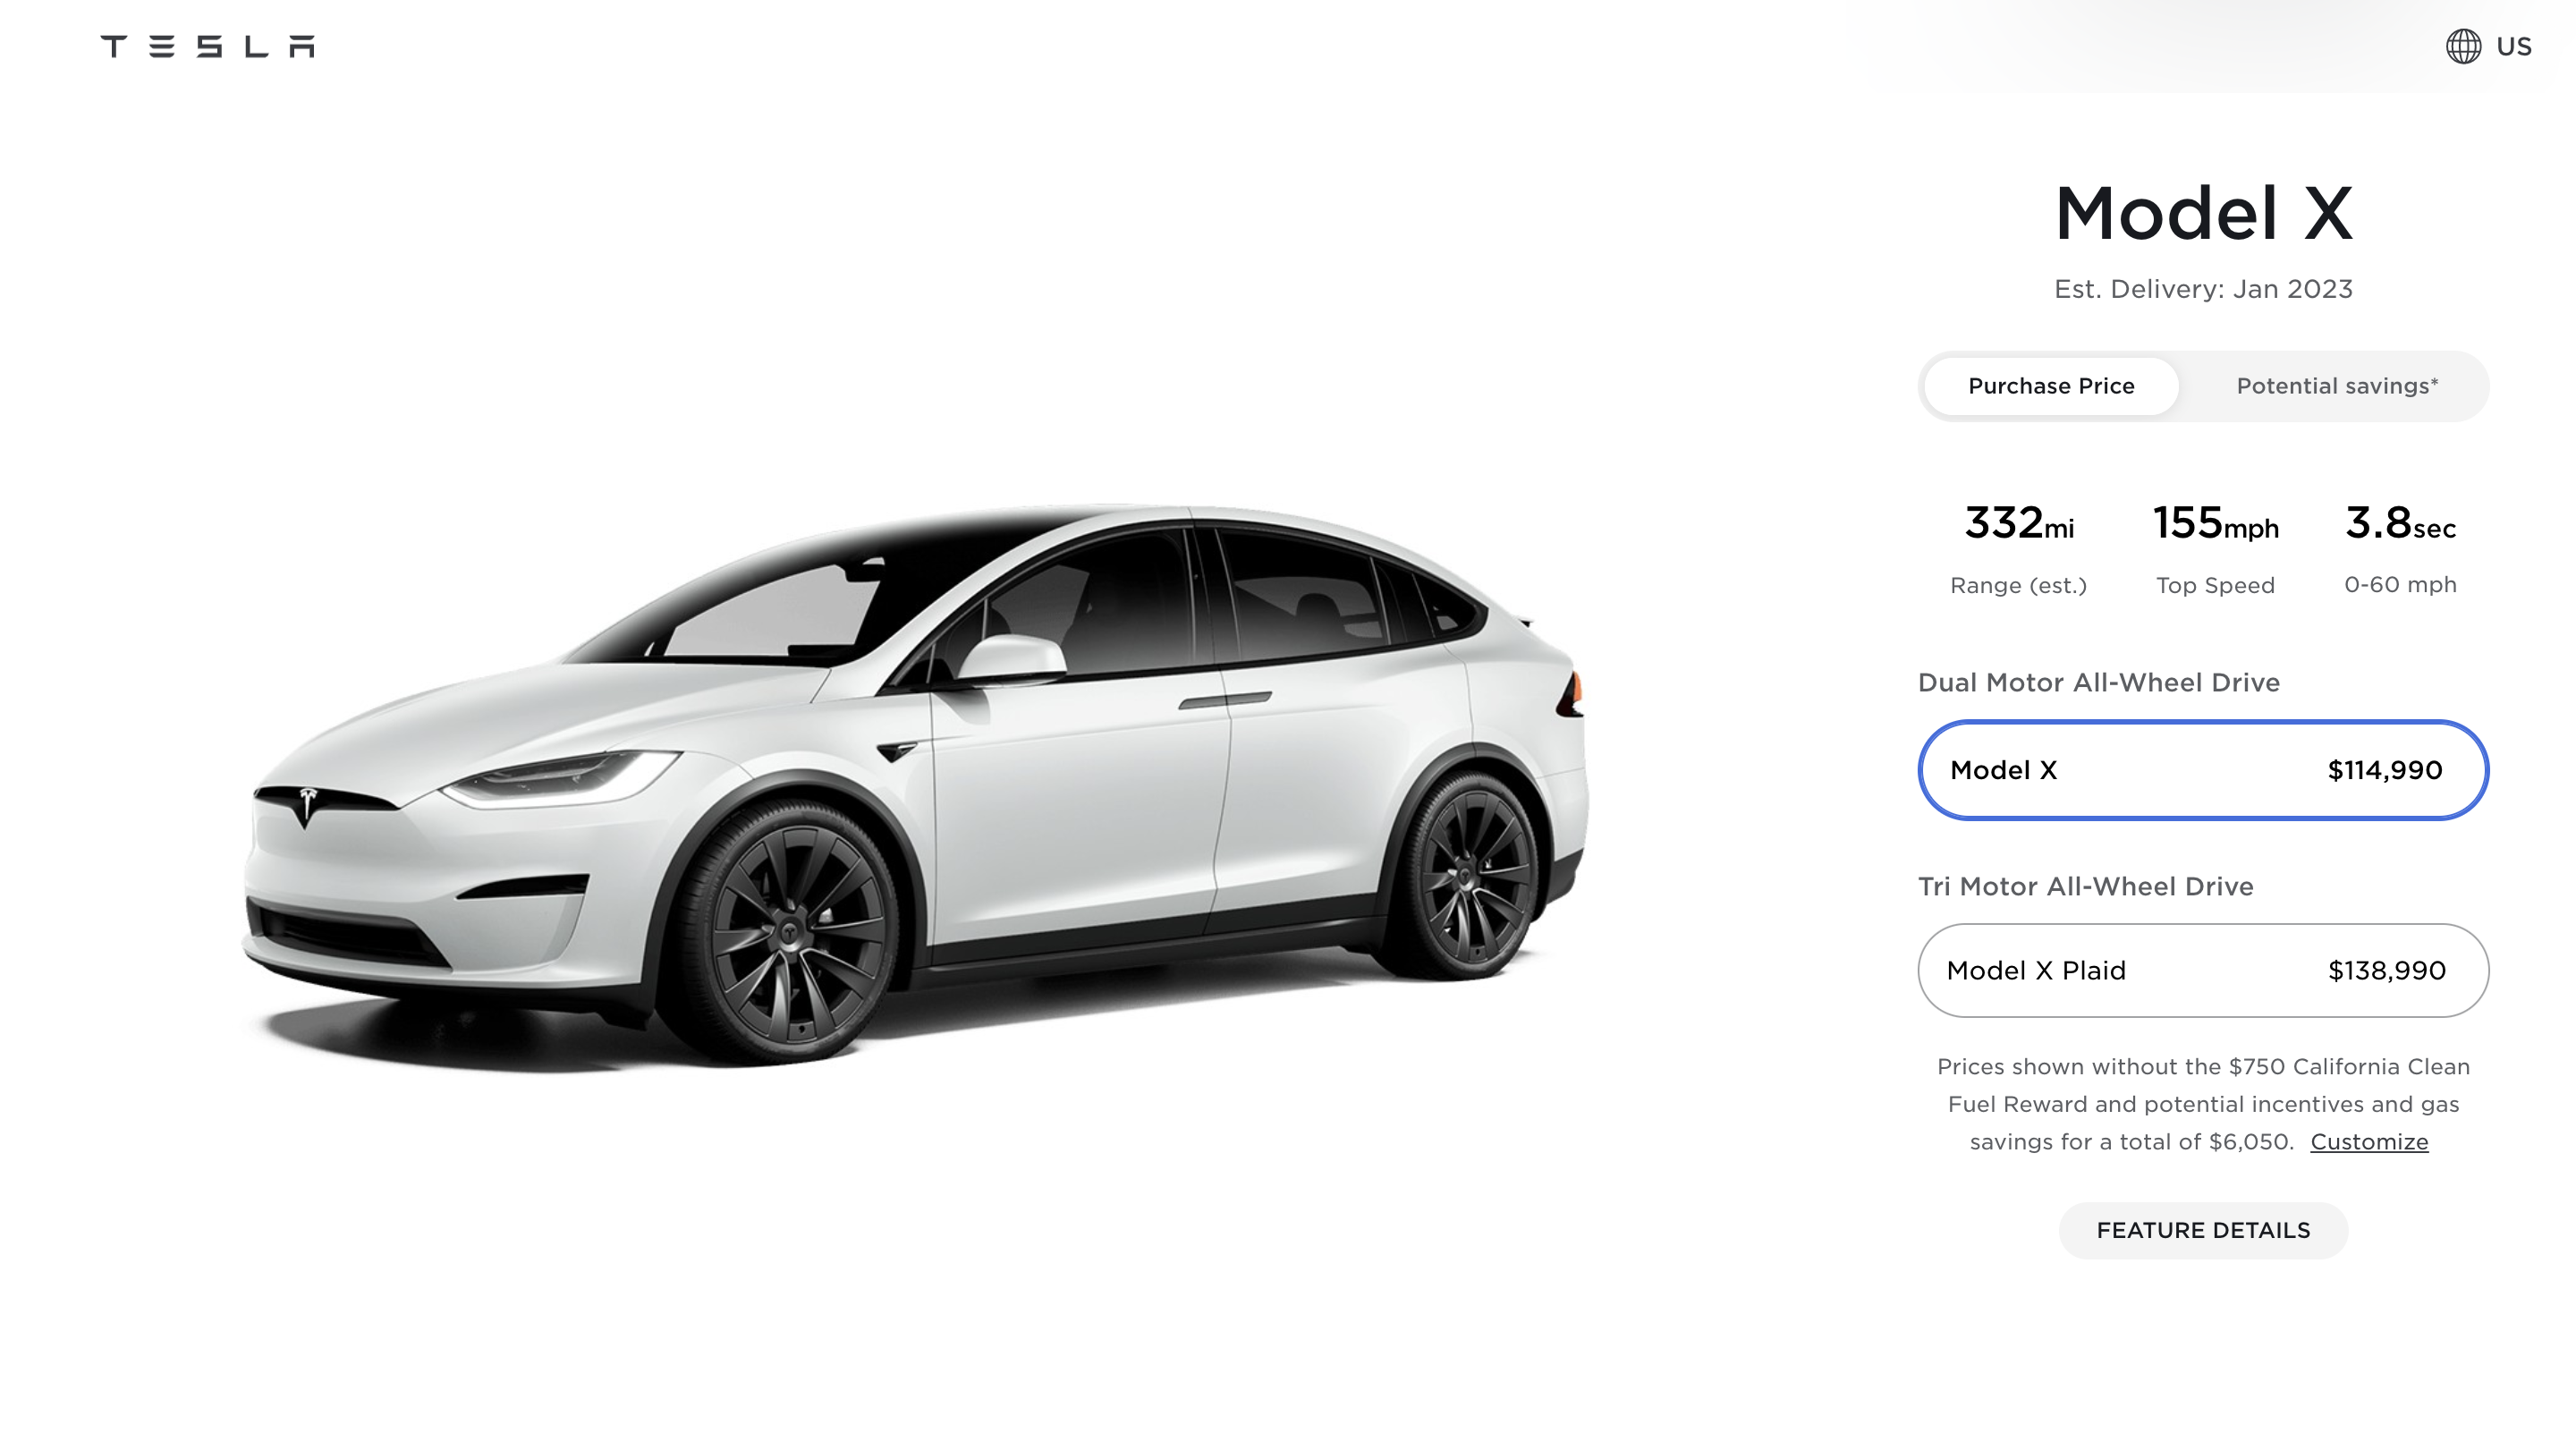 Upsell example from Tesla